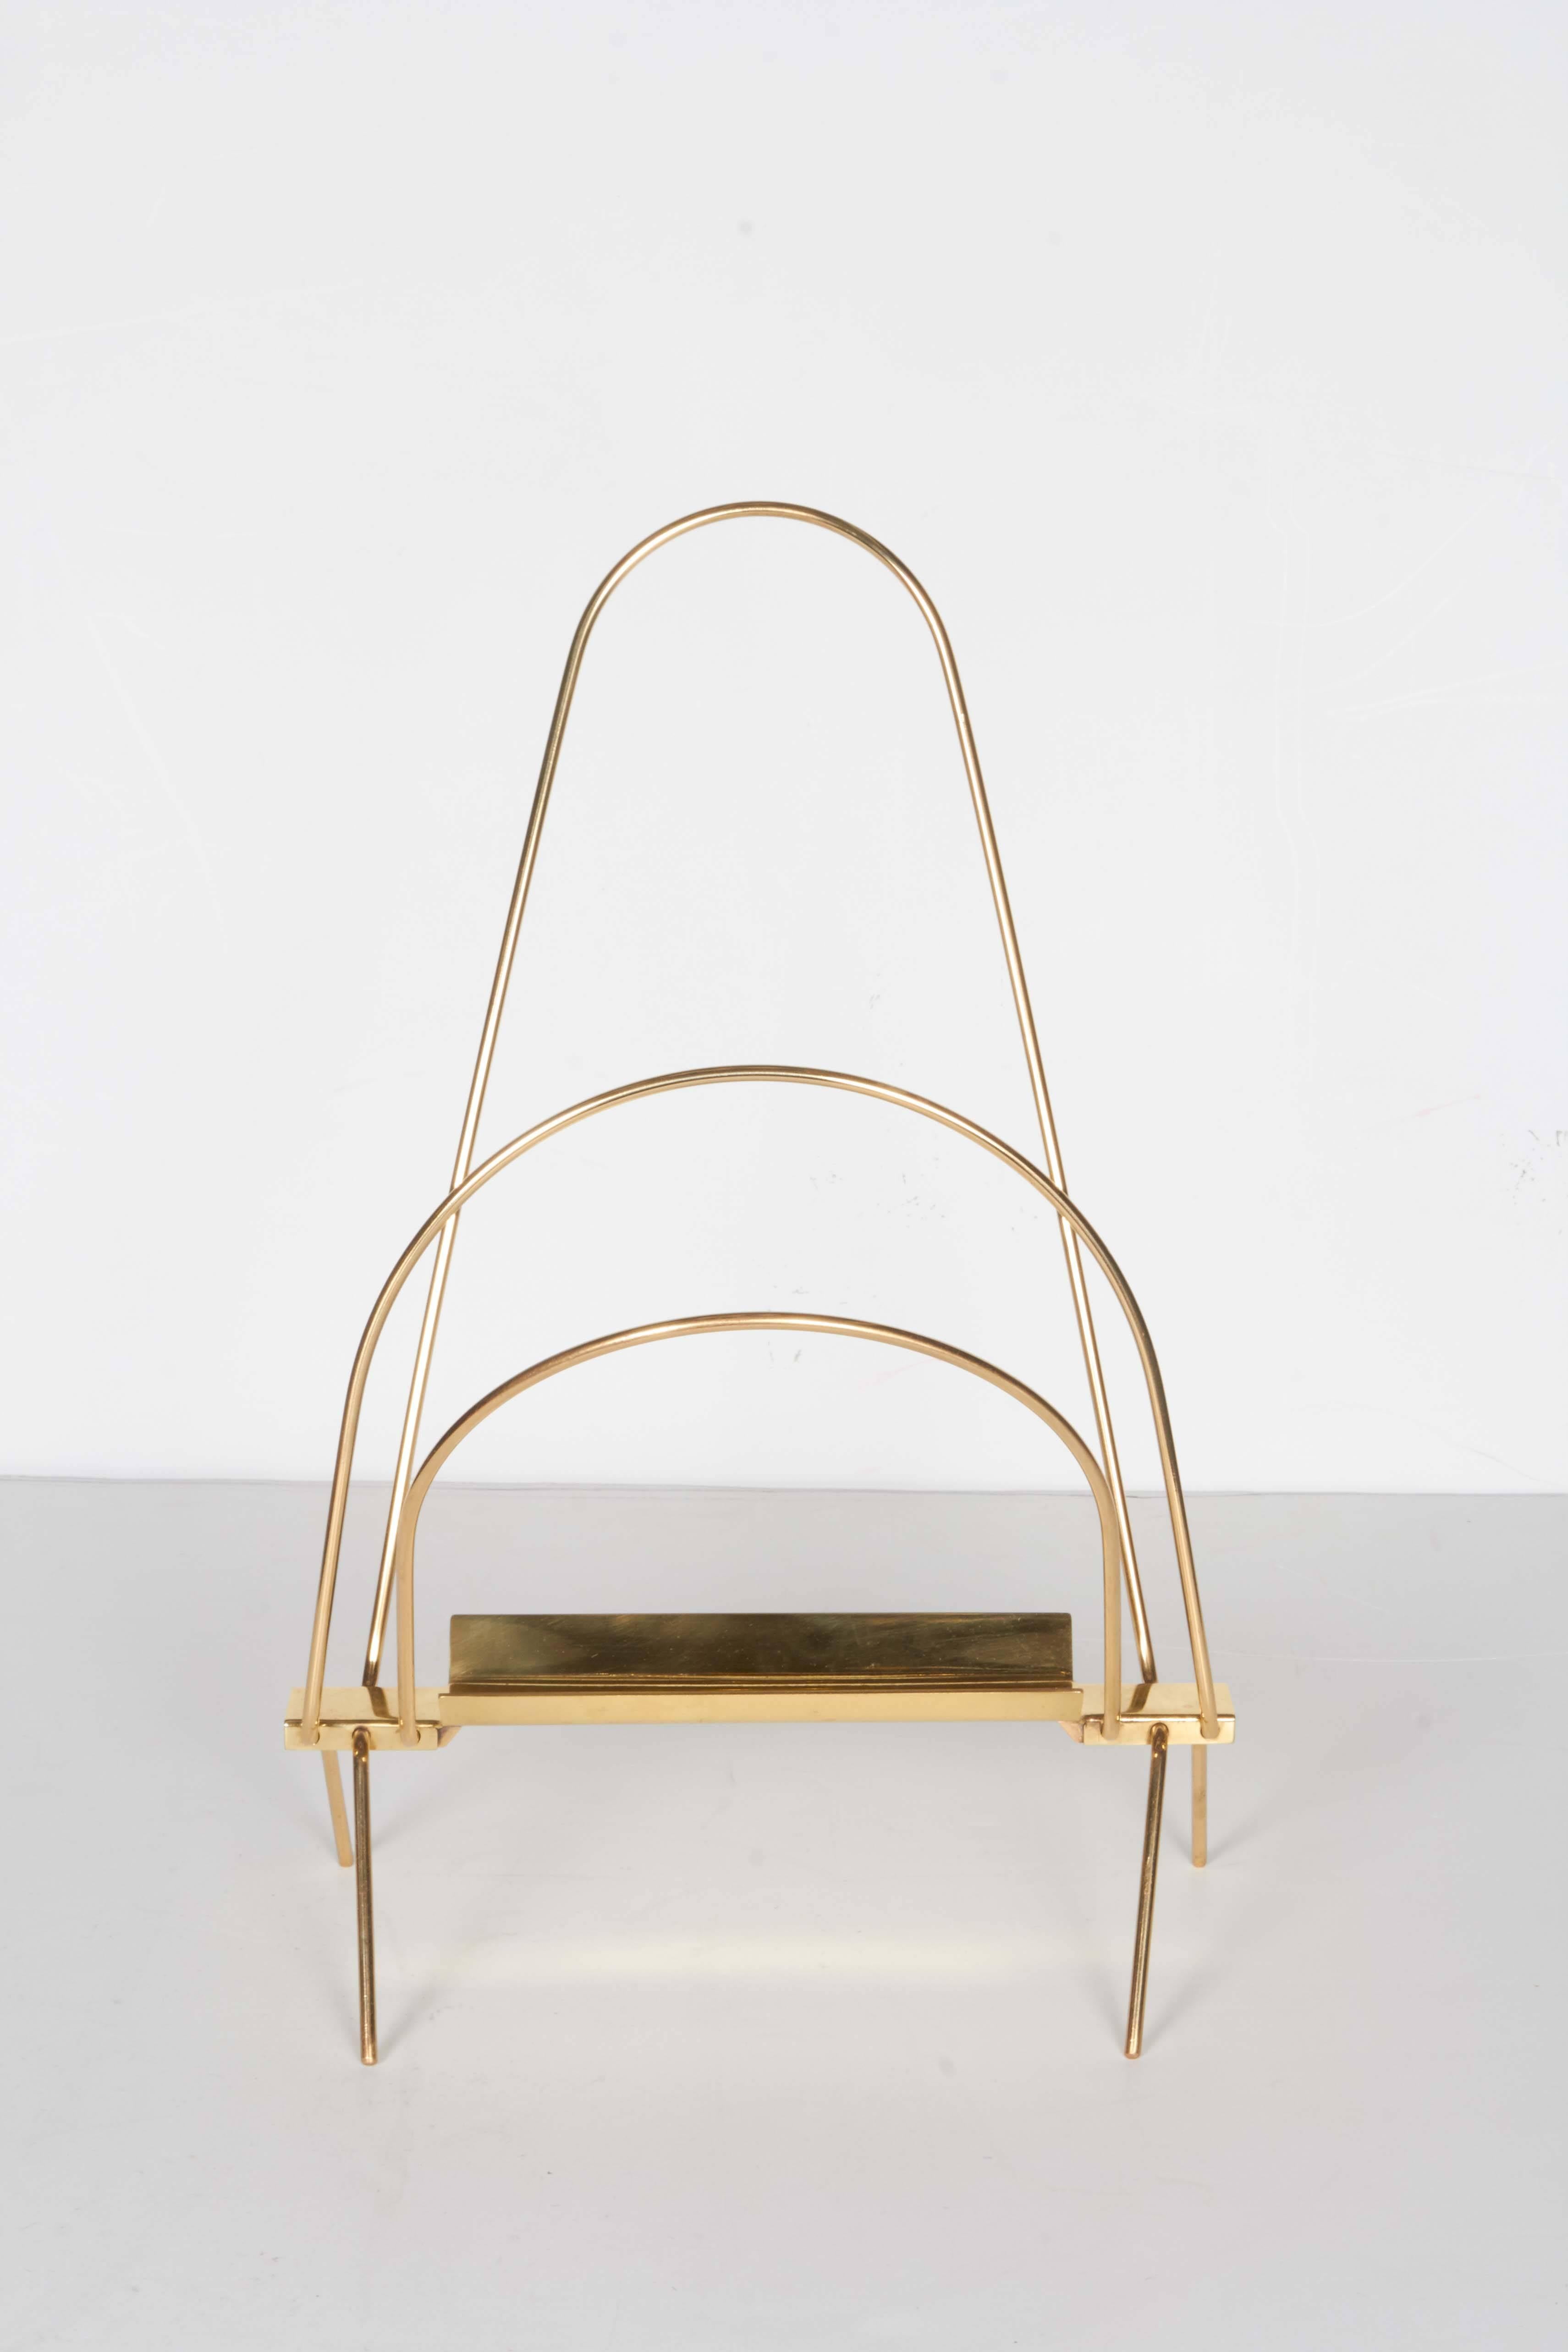 A very nicely made Italian 1950s magazine rack. The clean and modern triple arc design in bent brass rods allows the piece to stand alone without or with magazines. Brass newly polished and lacquered.